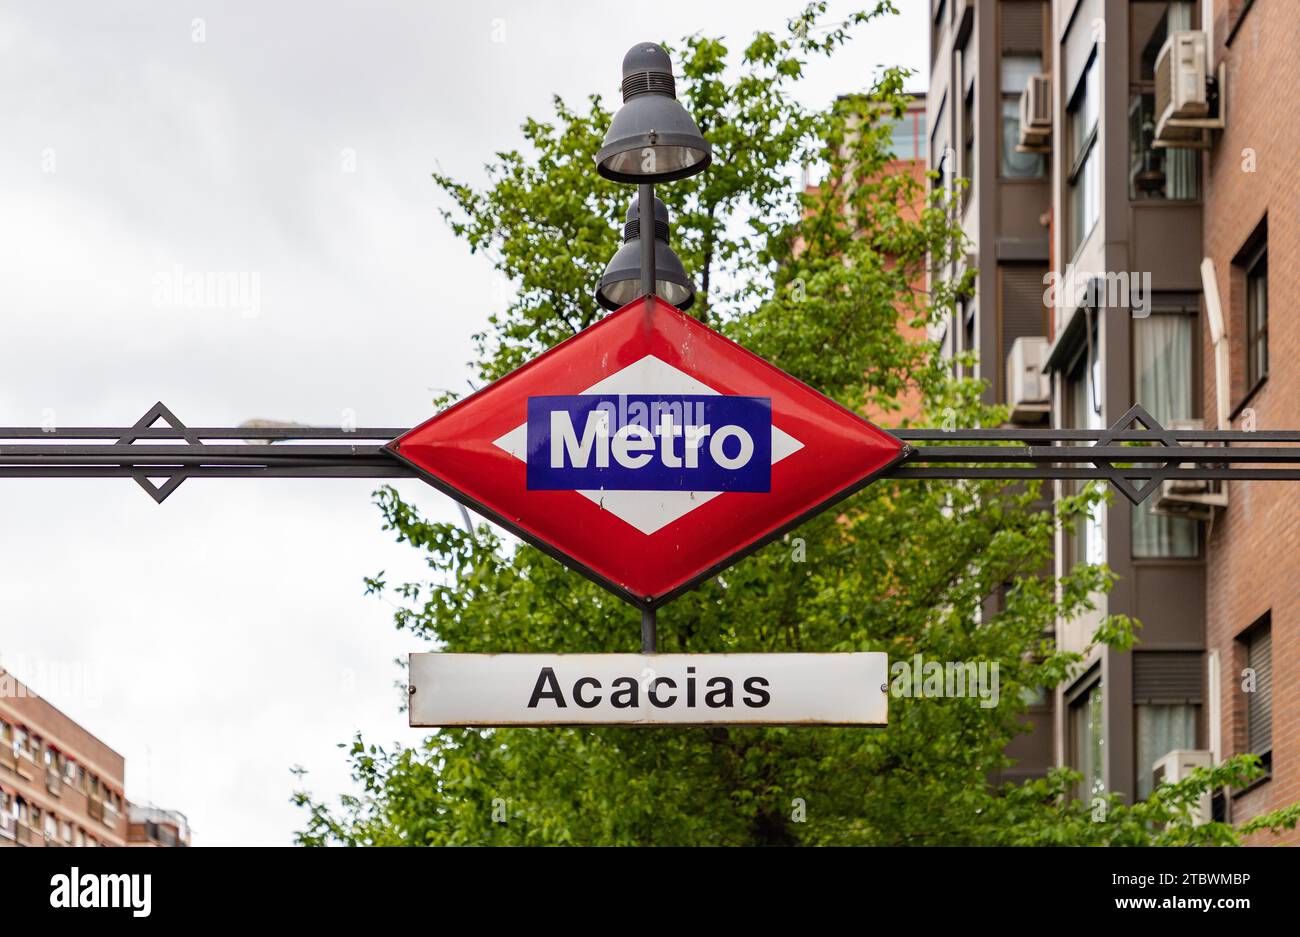 A picture of the Acacias Metro sign Stock Photo